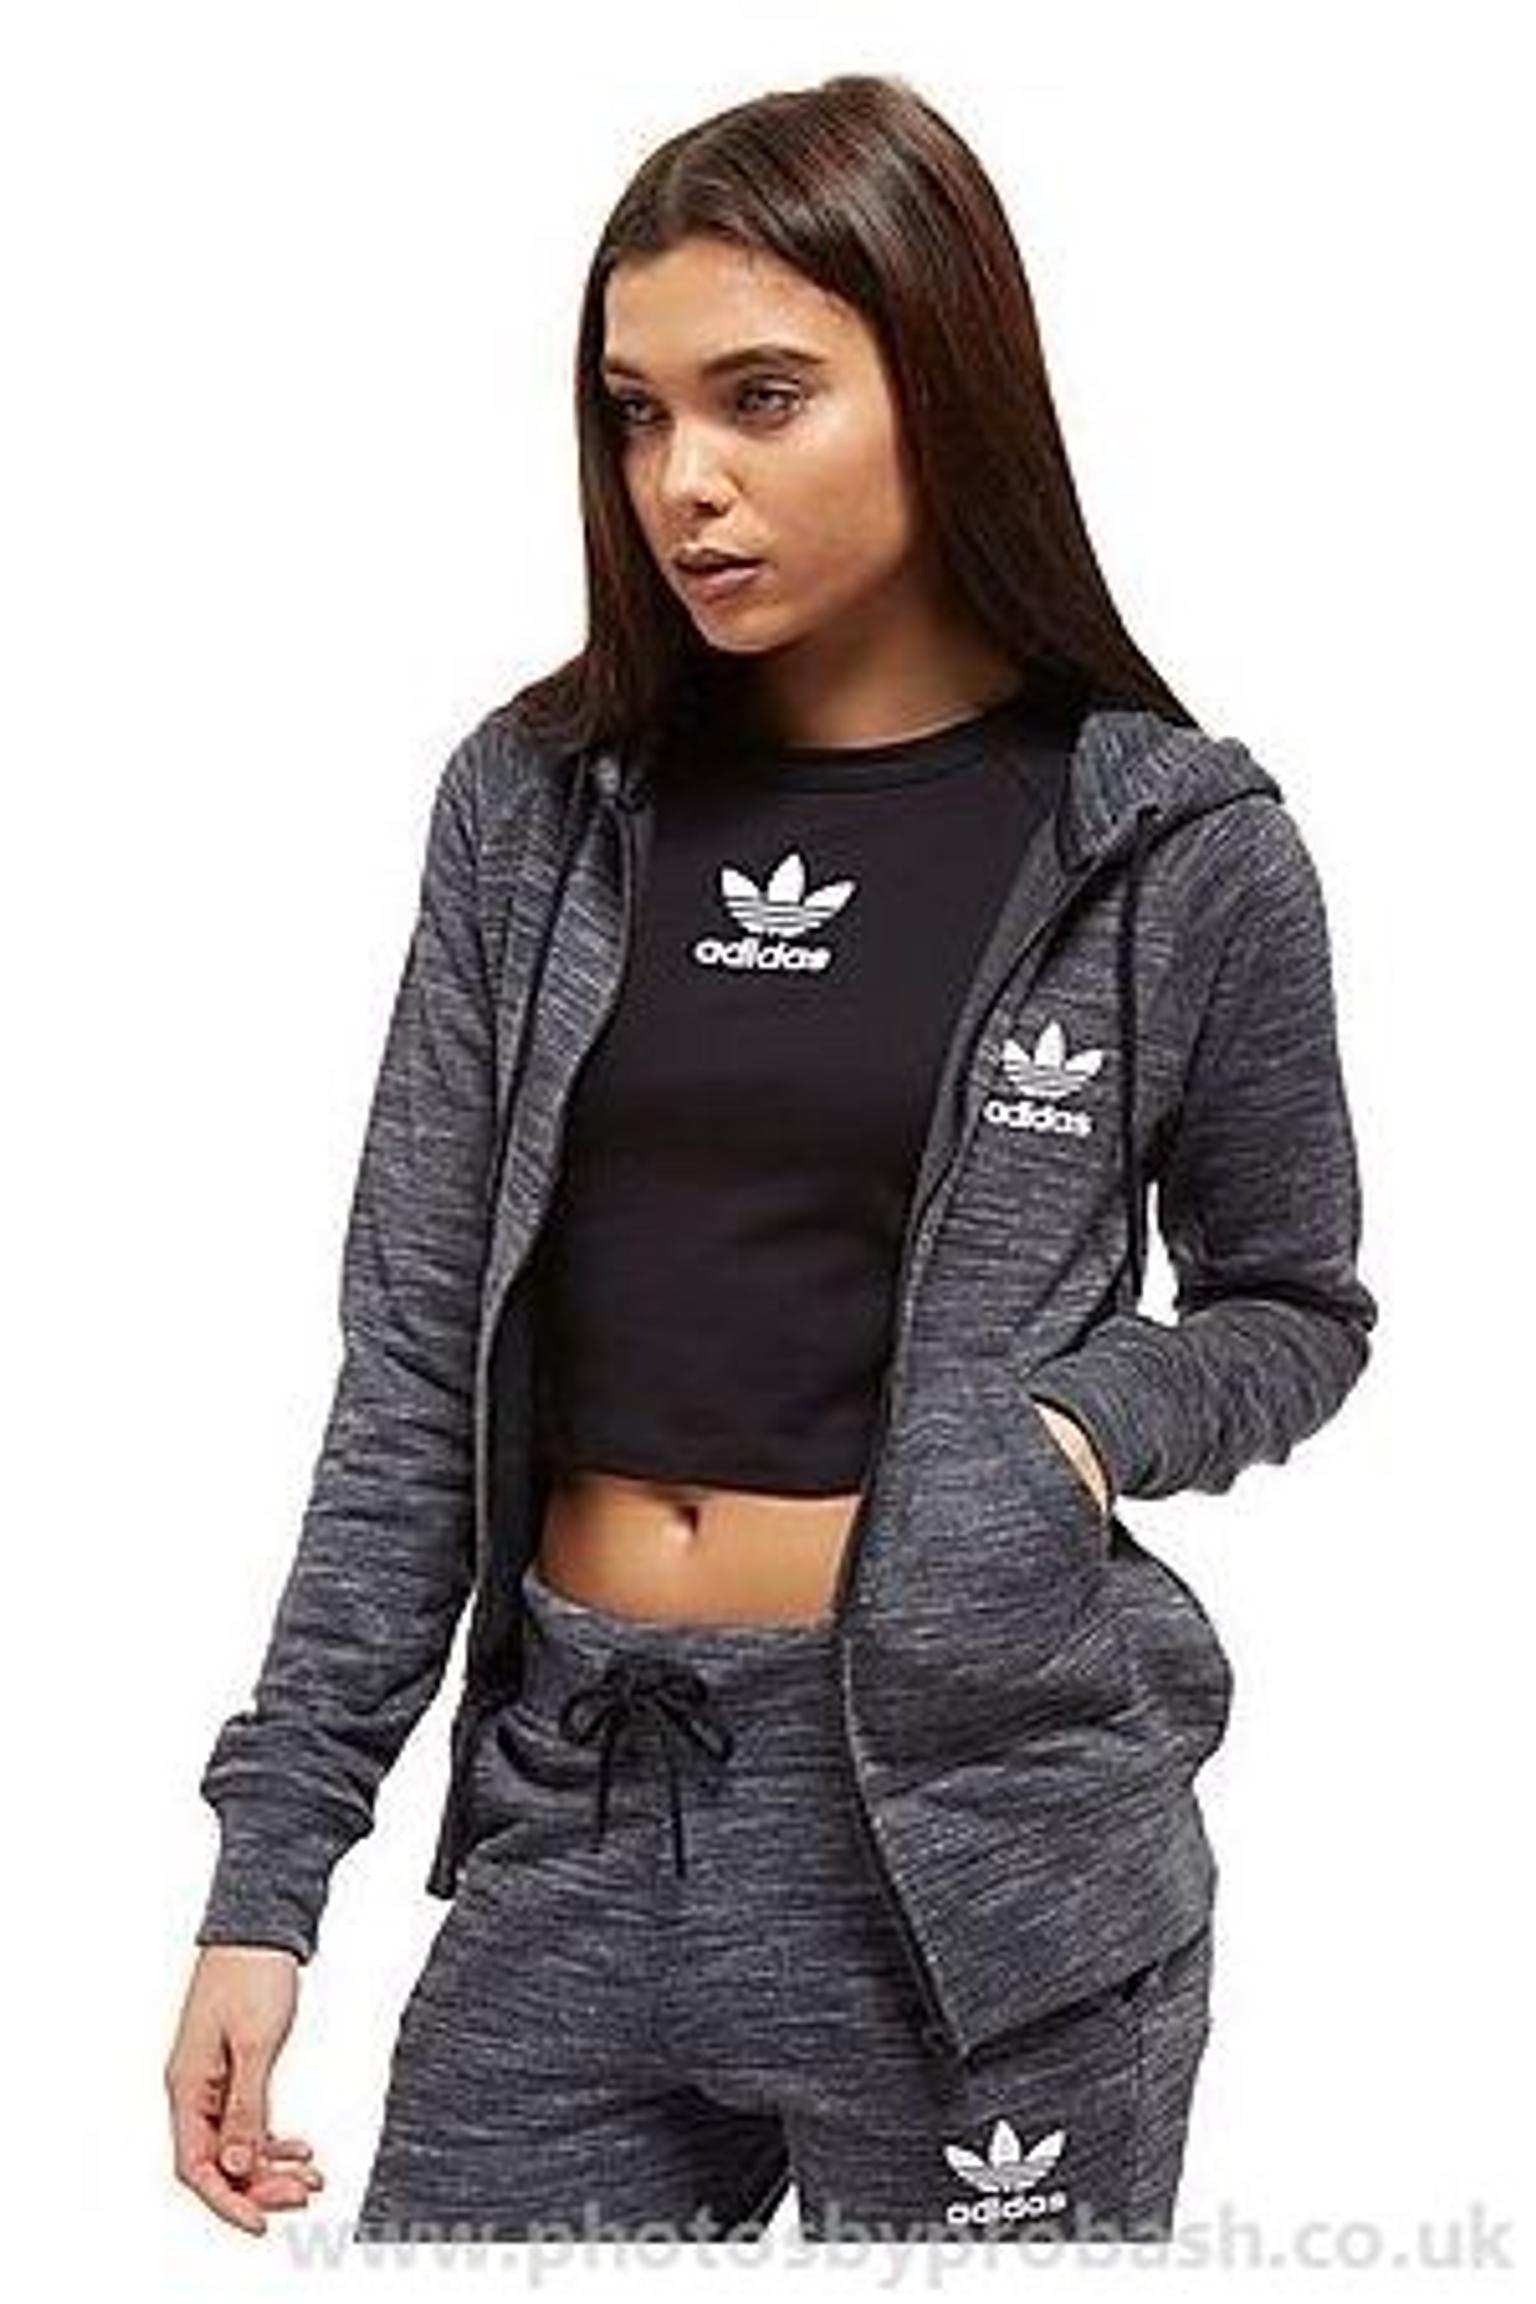 Adidas space dye full tracksuit in BB2 